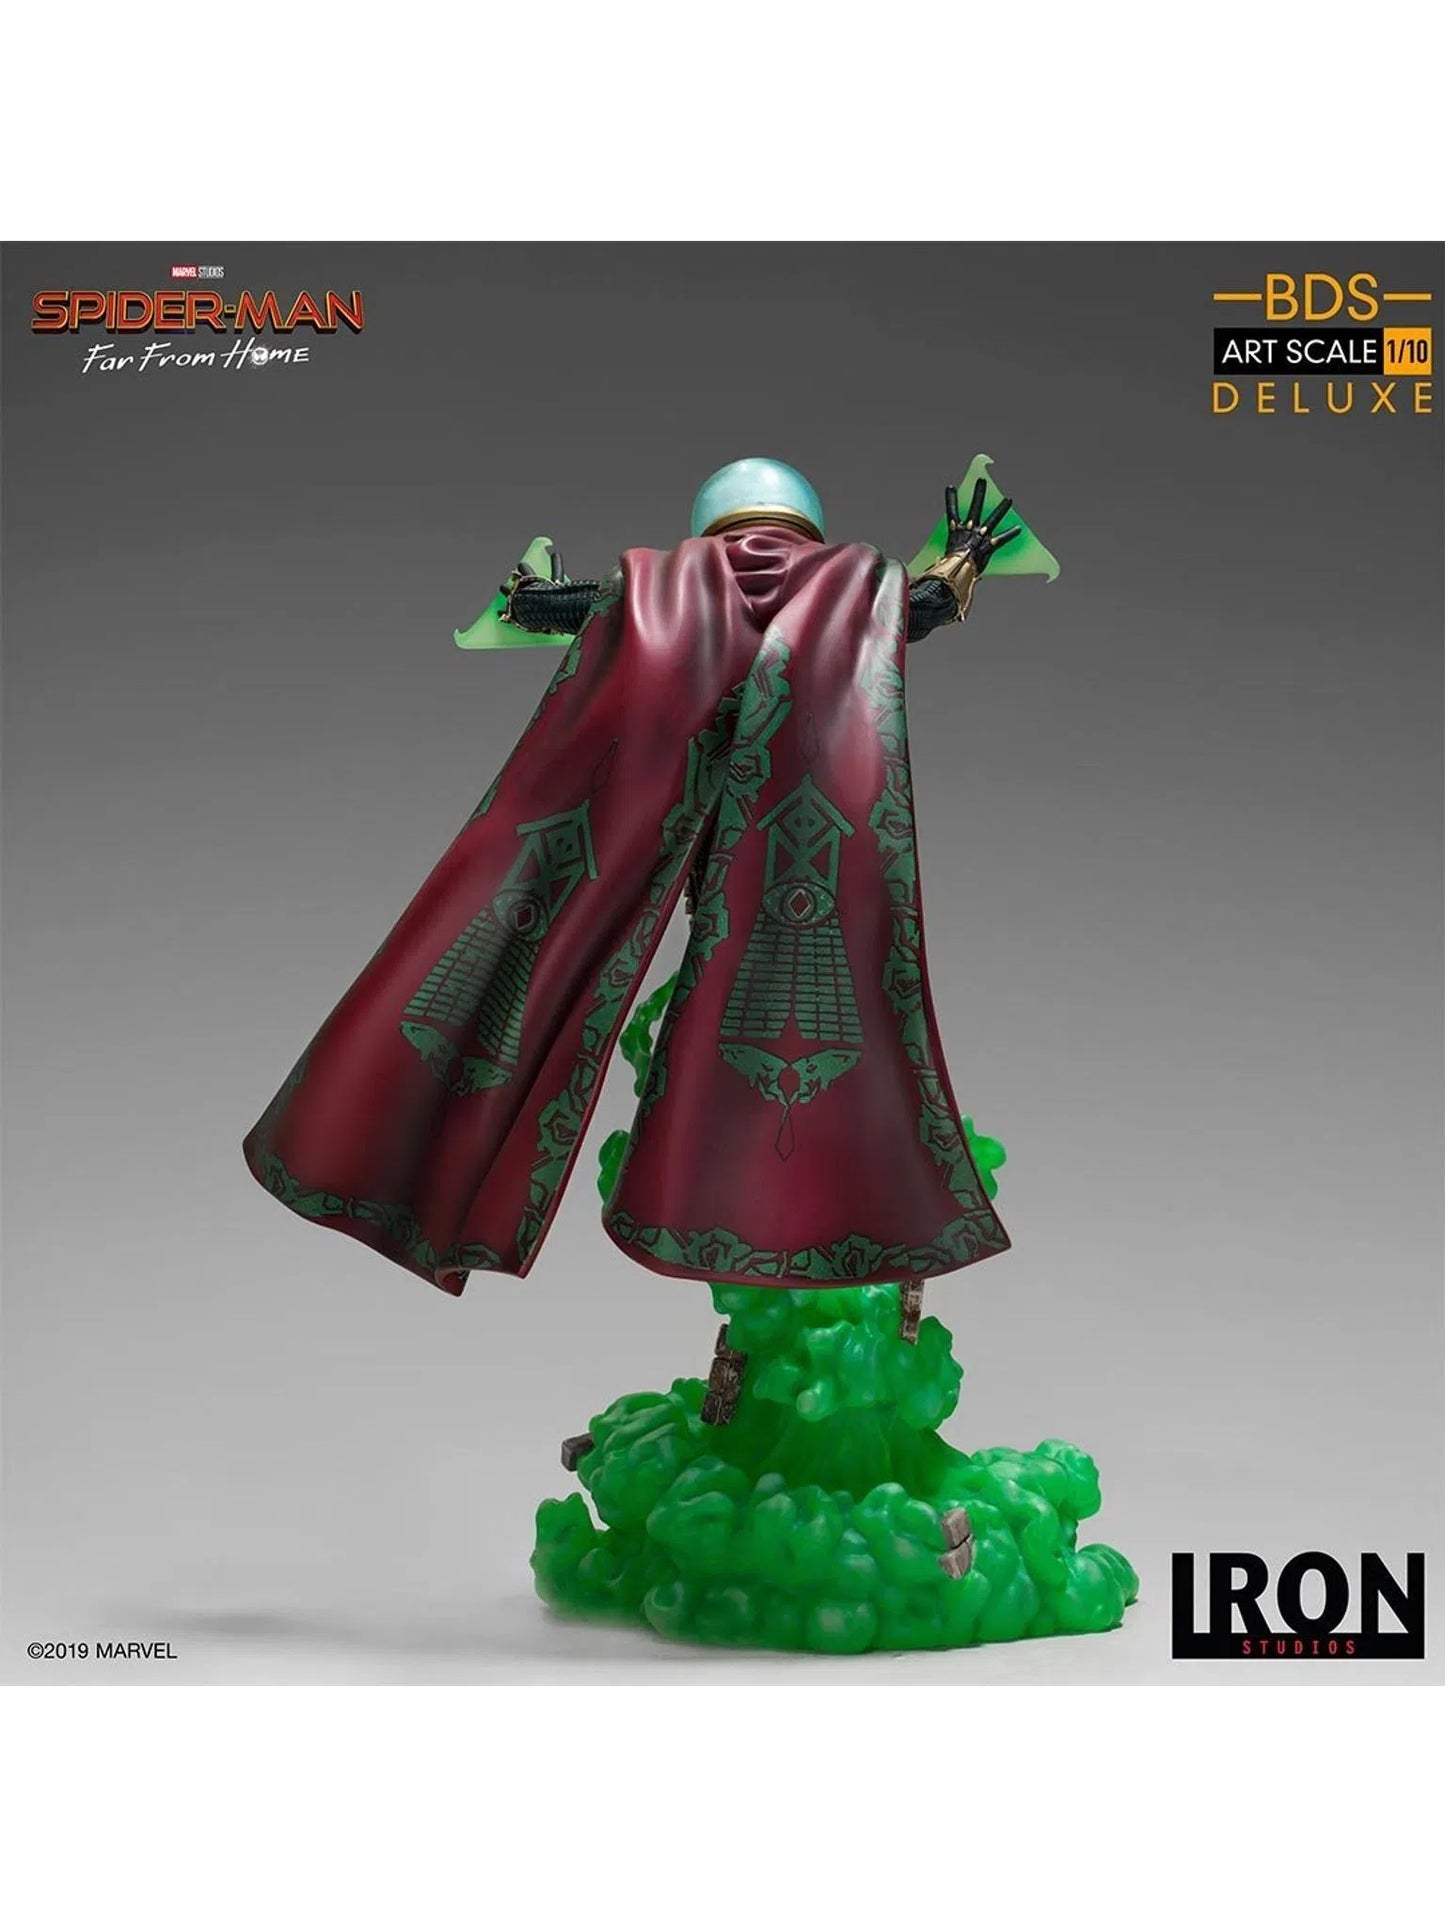 IRON STUDIOS SPIDER MAN FAR FROM HOME MYSTERIO BDS ART SCALE 1/10 MARCAS22919-10 - Anotoys Collectibles